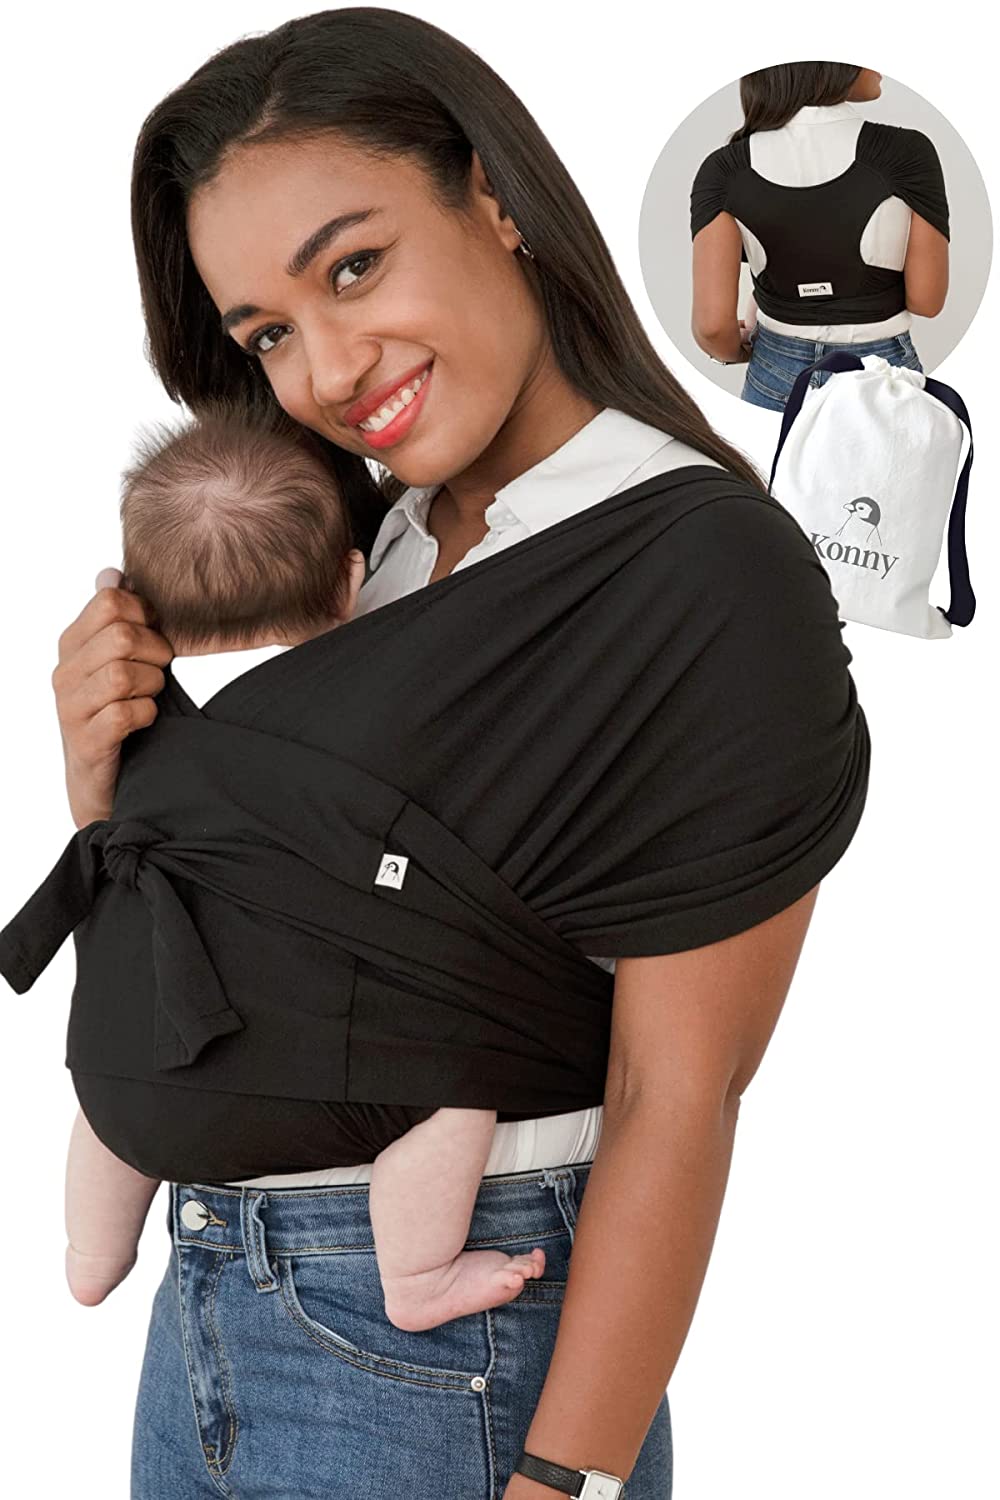 Konny Baby Carrier | Ultra-Light, Easy Baby Sling | Newborns, Infants up to 20 kg Toddlers | Soft and Breathable Fabric | Useful Sleep Solution (Black, M)